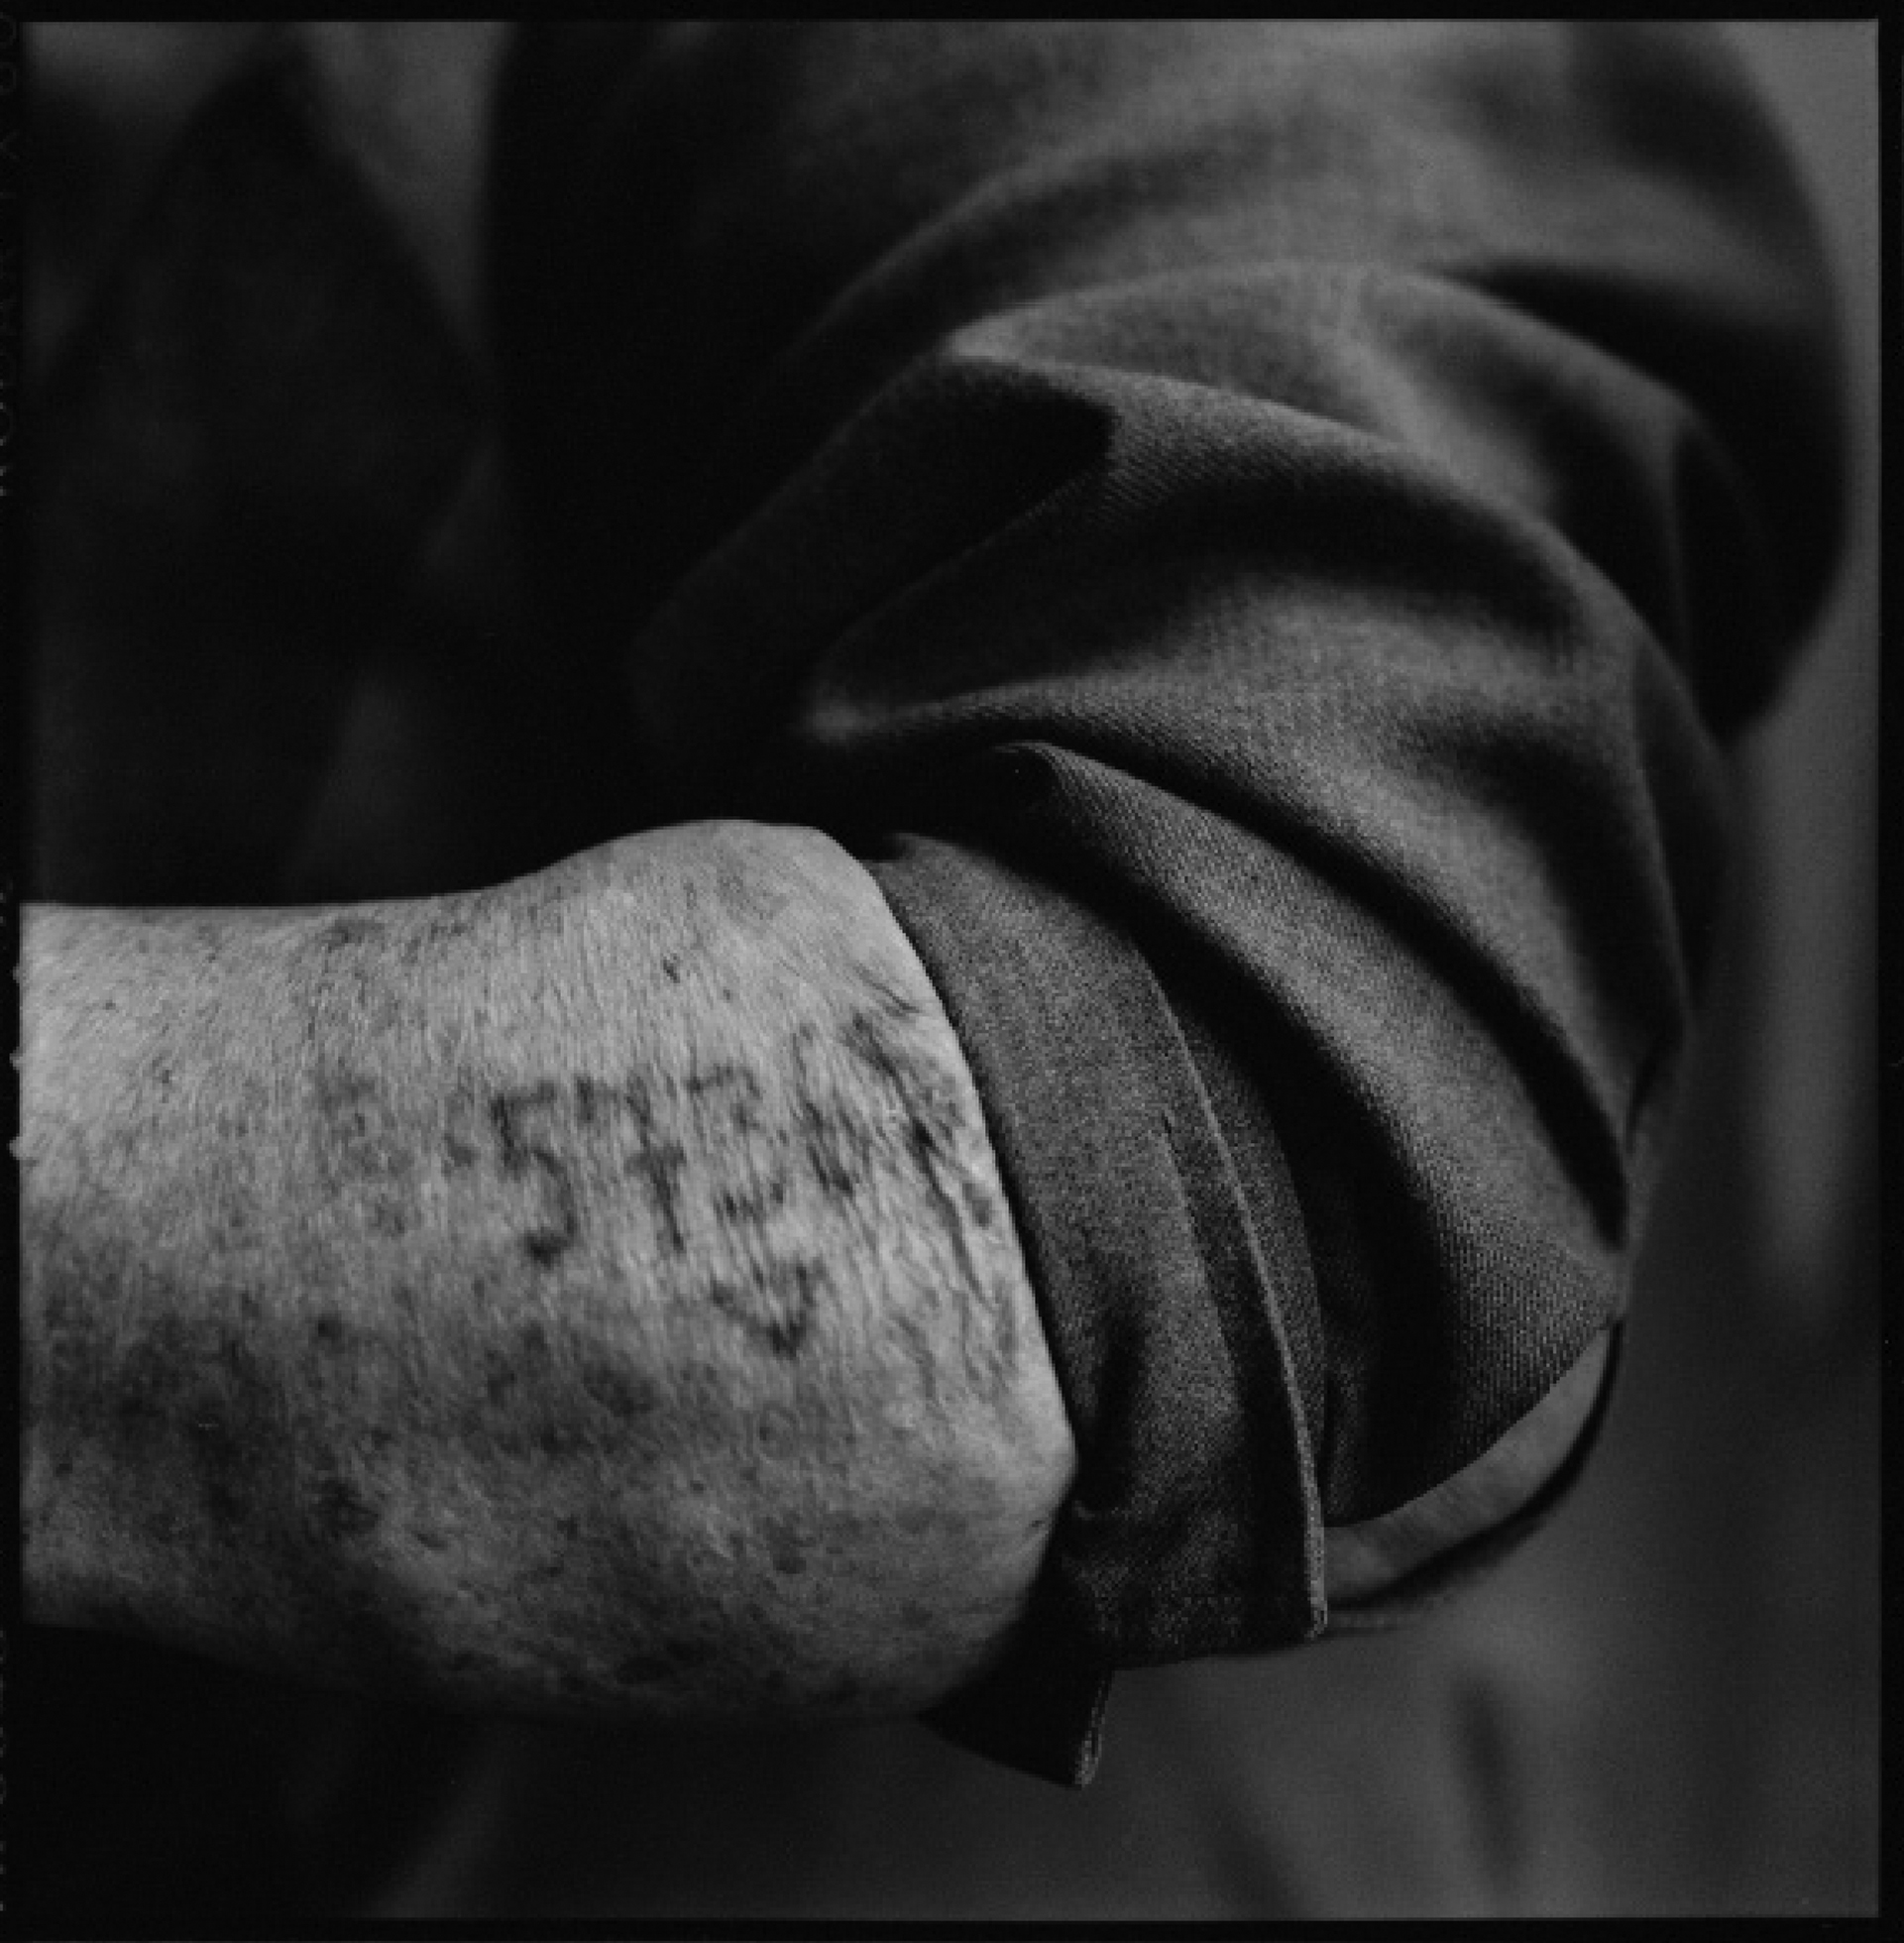 A Holocaust survivor’s left forearm with a tattoo that reads “57365.”